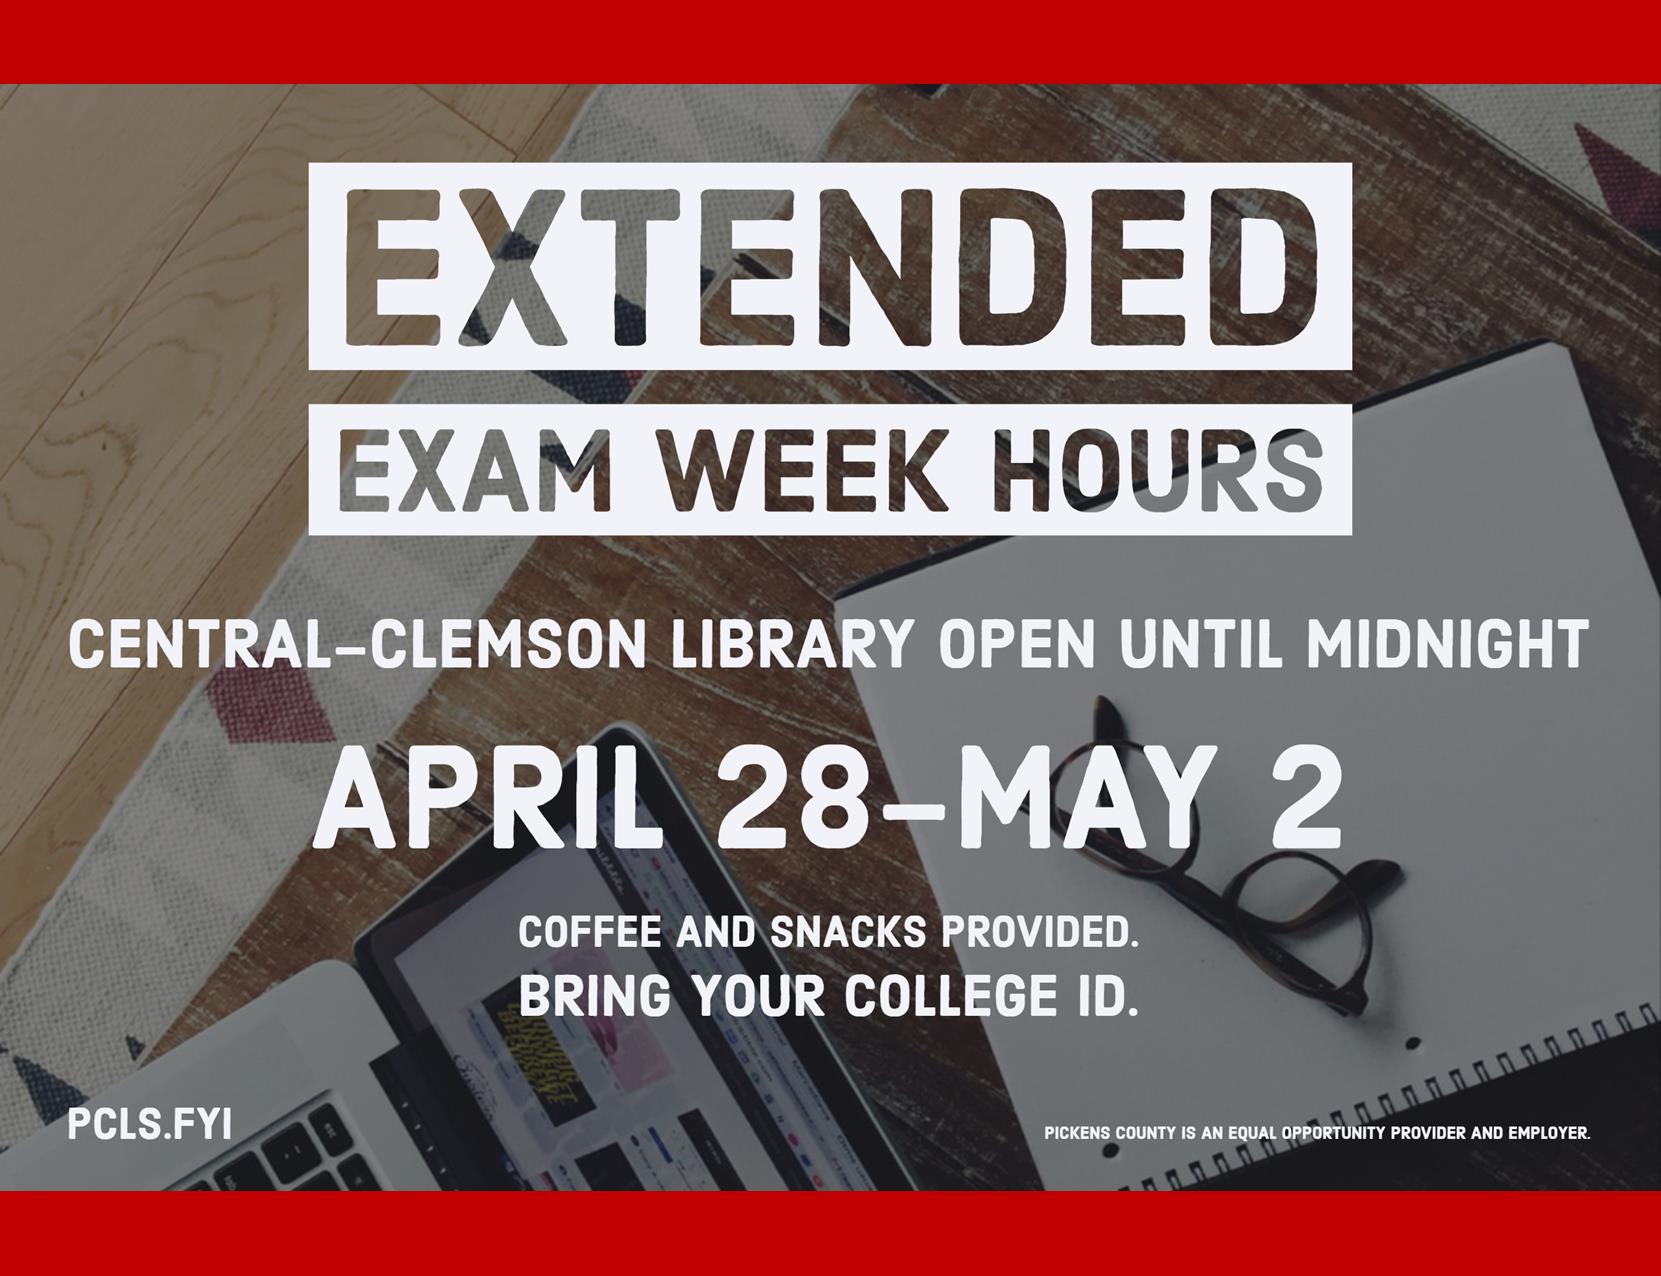 extended exam week hours, central clemson library open until midnight for college students